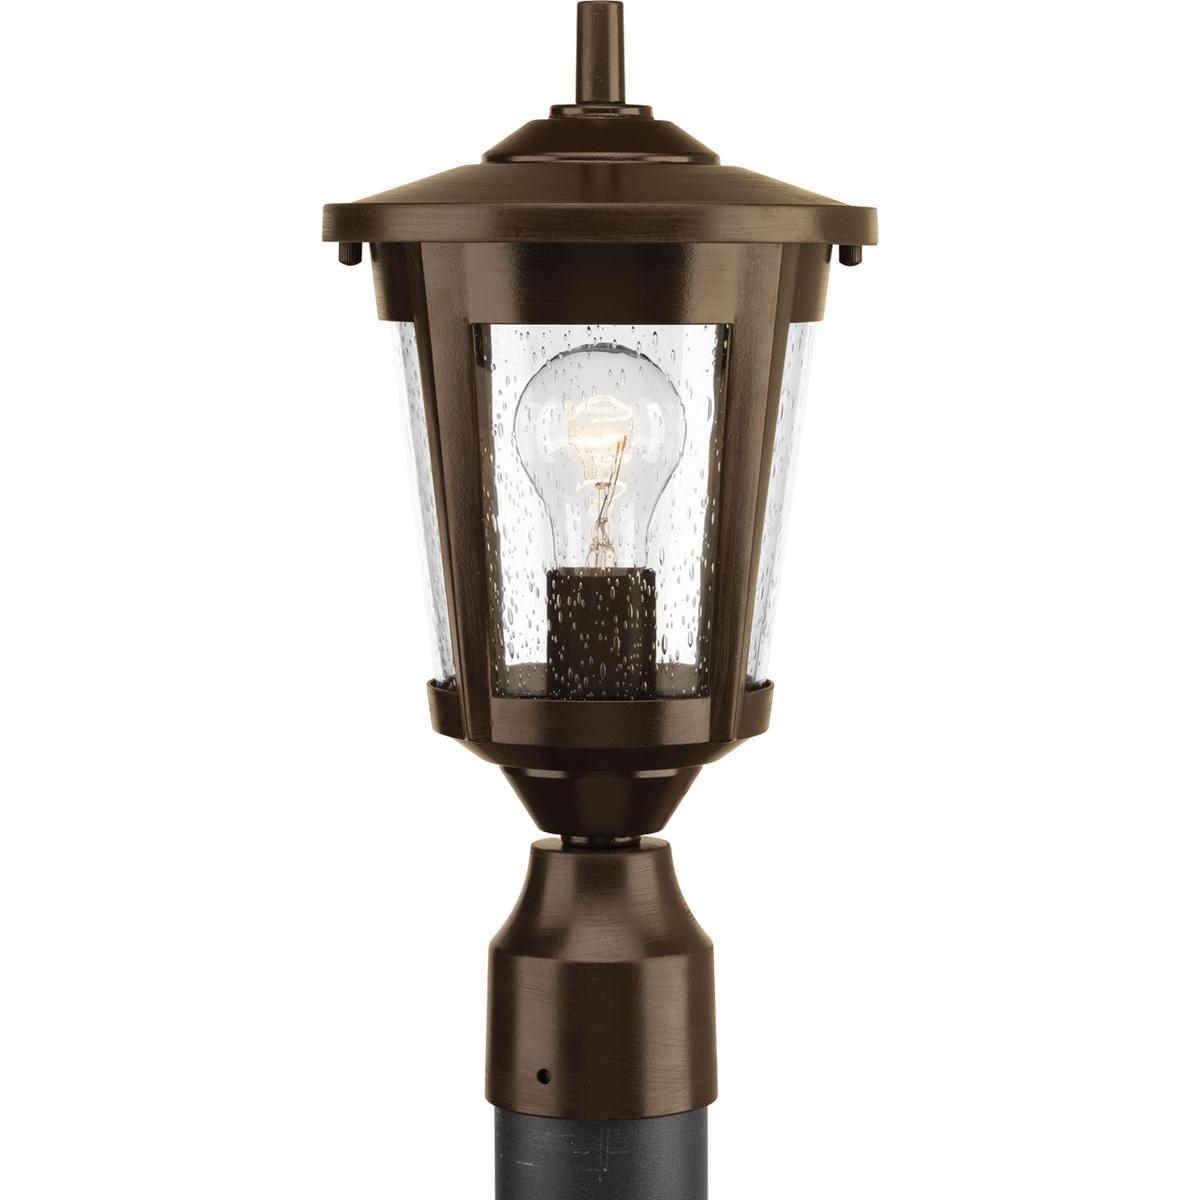 Hubbell P6425-20 The East Haven Collection offers modern styling to complement a wide variety of home styles. The one-light post lantern has an Antique Bronze frame that cradles a seeded glass shade. Fits 3" post (order separately). Hanging and wall mounting fixtures comp